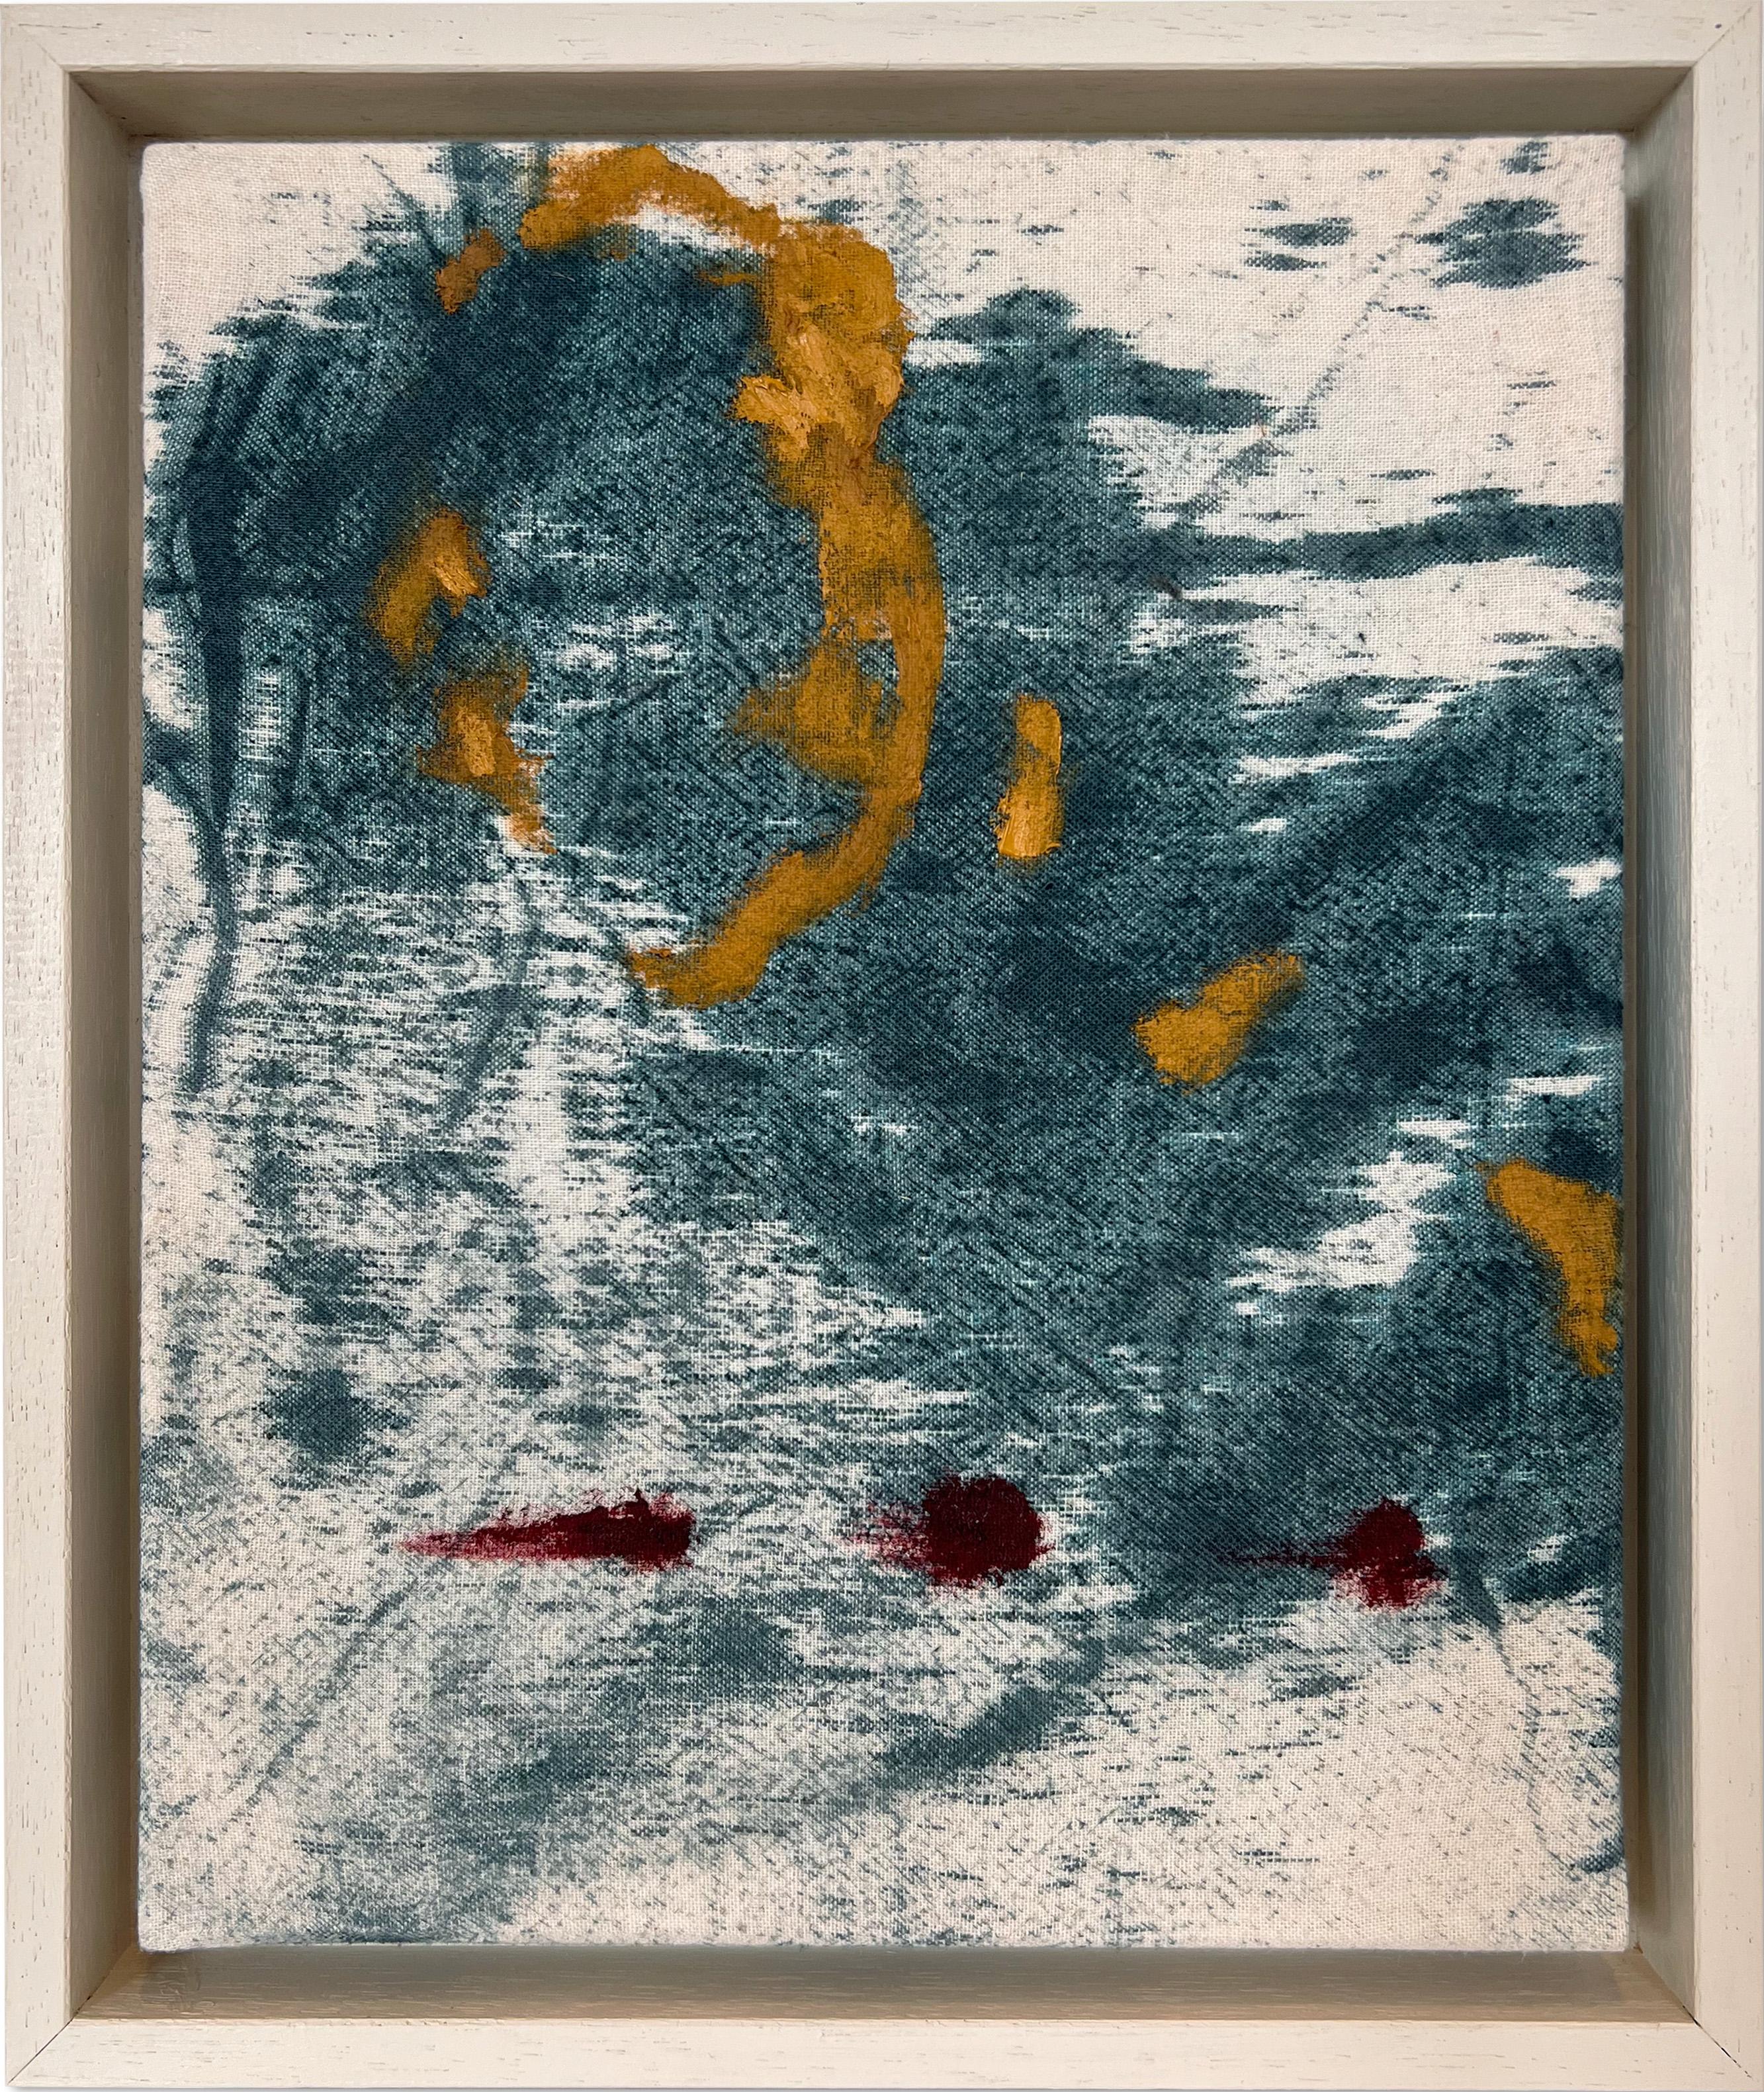 "Day Remains II" (abstract, blue dye, deep red, yellow, framed painting, cotton)